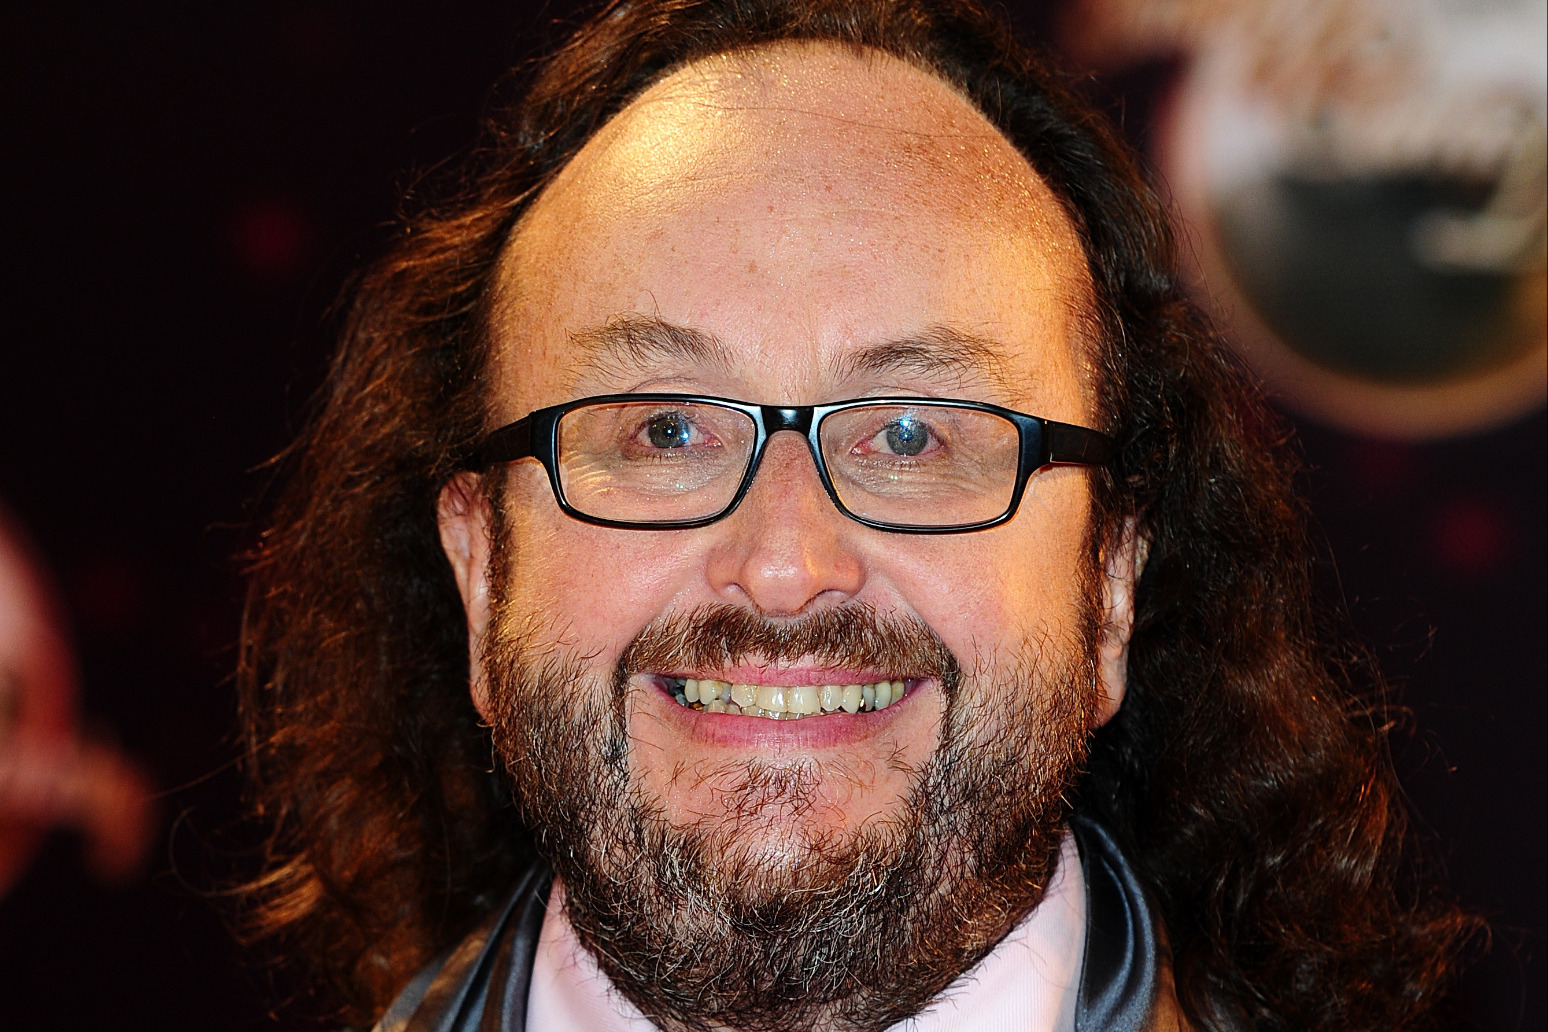 Hairy Bikers star Dave Myers dies aged 66 